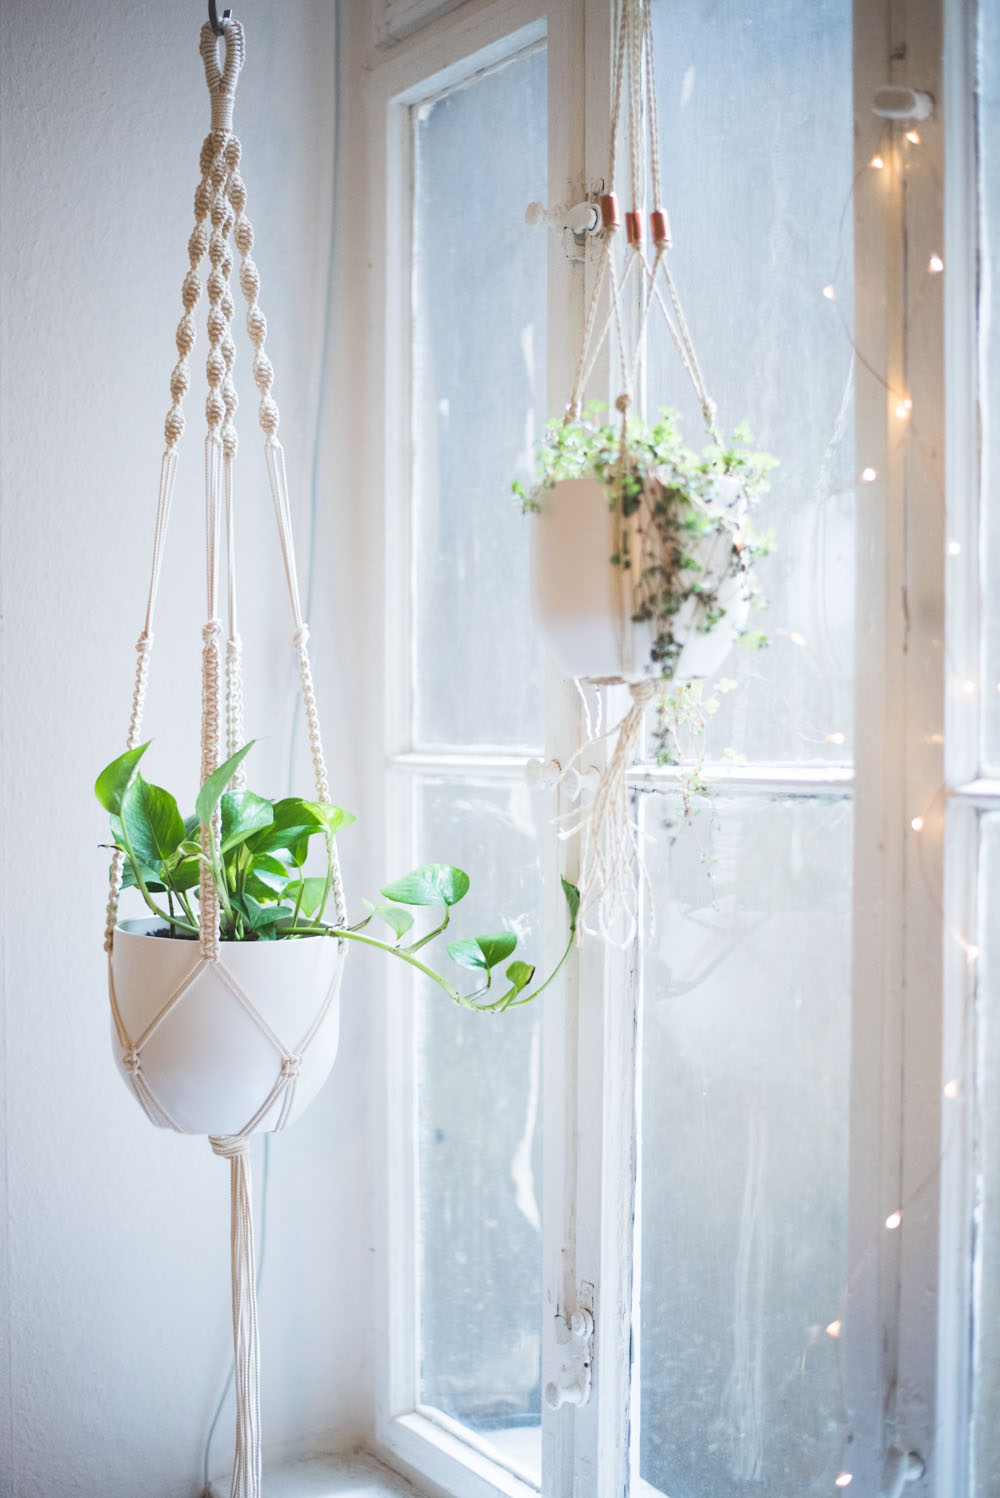 Macrame plant hanger DIY by Hey Lila Hey / Learn how to make beginner-friendly macrame knots so you can macrame all day!